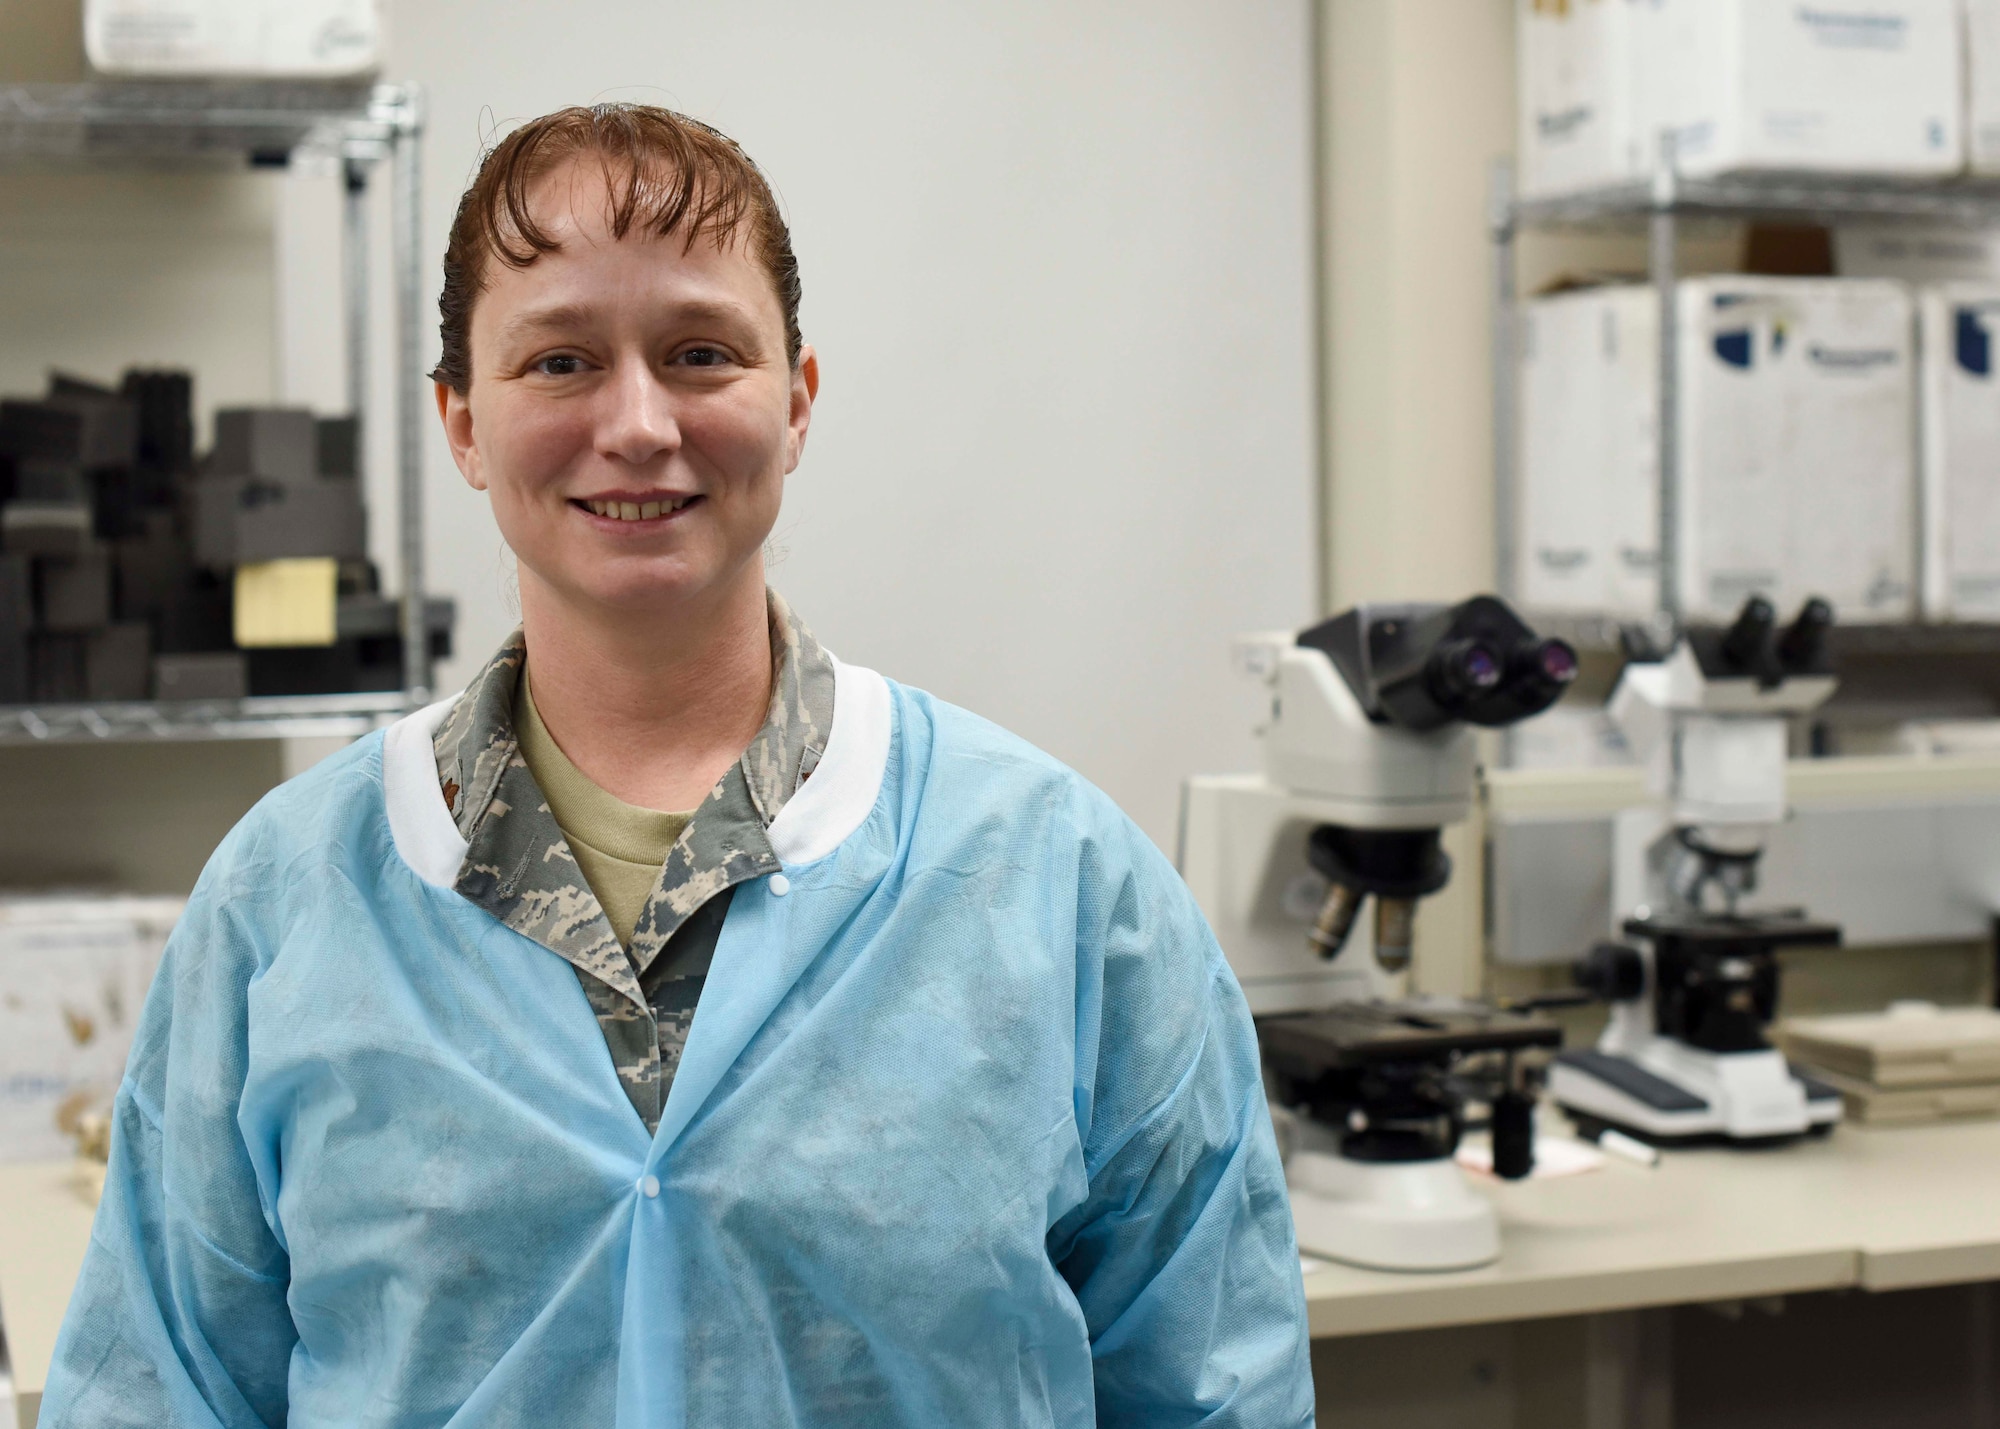 Maj. Rebecca Bird, 49th Medical Group laboratory flight commander, poses for a photo, Jan. 24, 2019, on Holloman Air Force Base, N.M. As a biomedical scientist, Bird is able to test all the chemicals and cells in the body to screen for a variety of diseases and medical conditions, and ensure the body is properly balanced. (U.S. Air Force photo by Staff Sgt. BreeAnn Sachs)